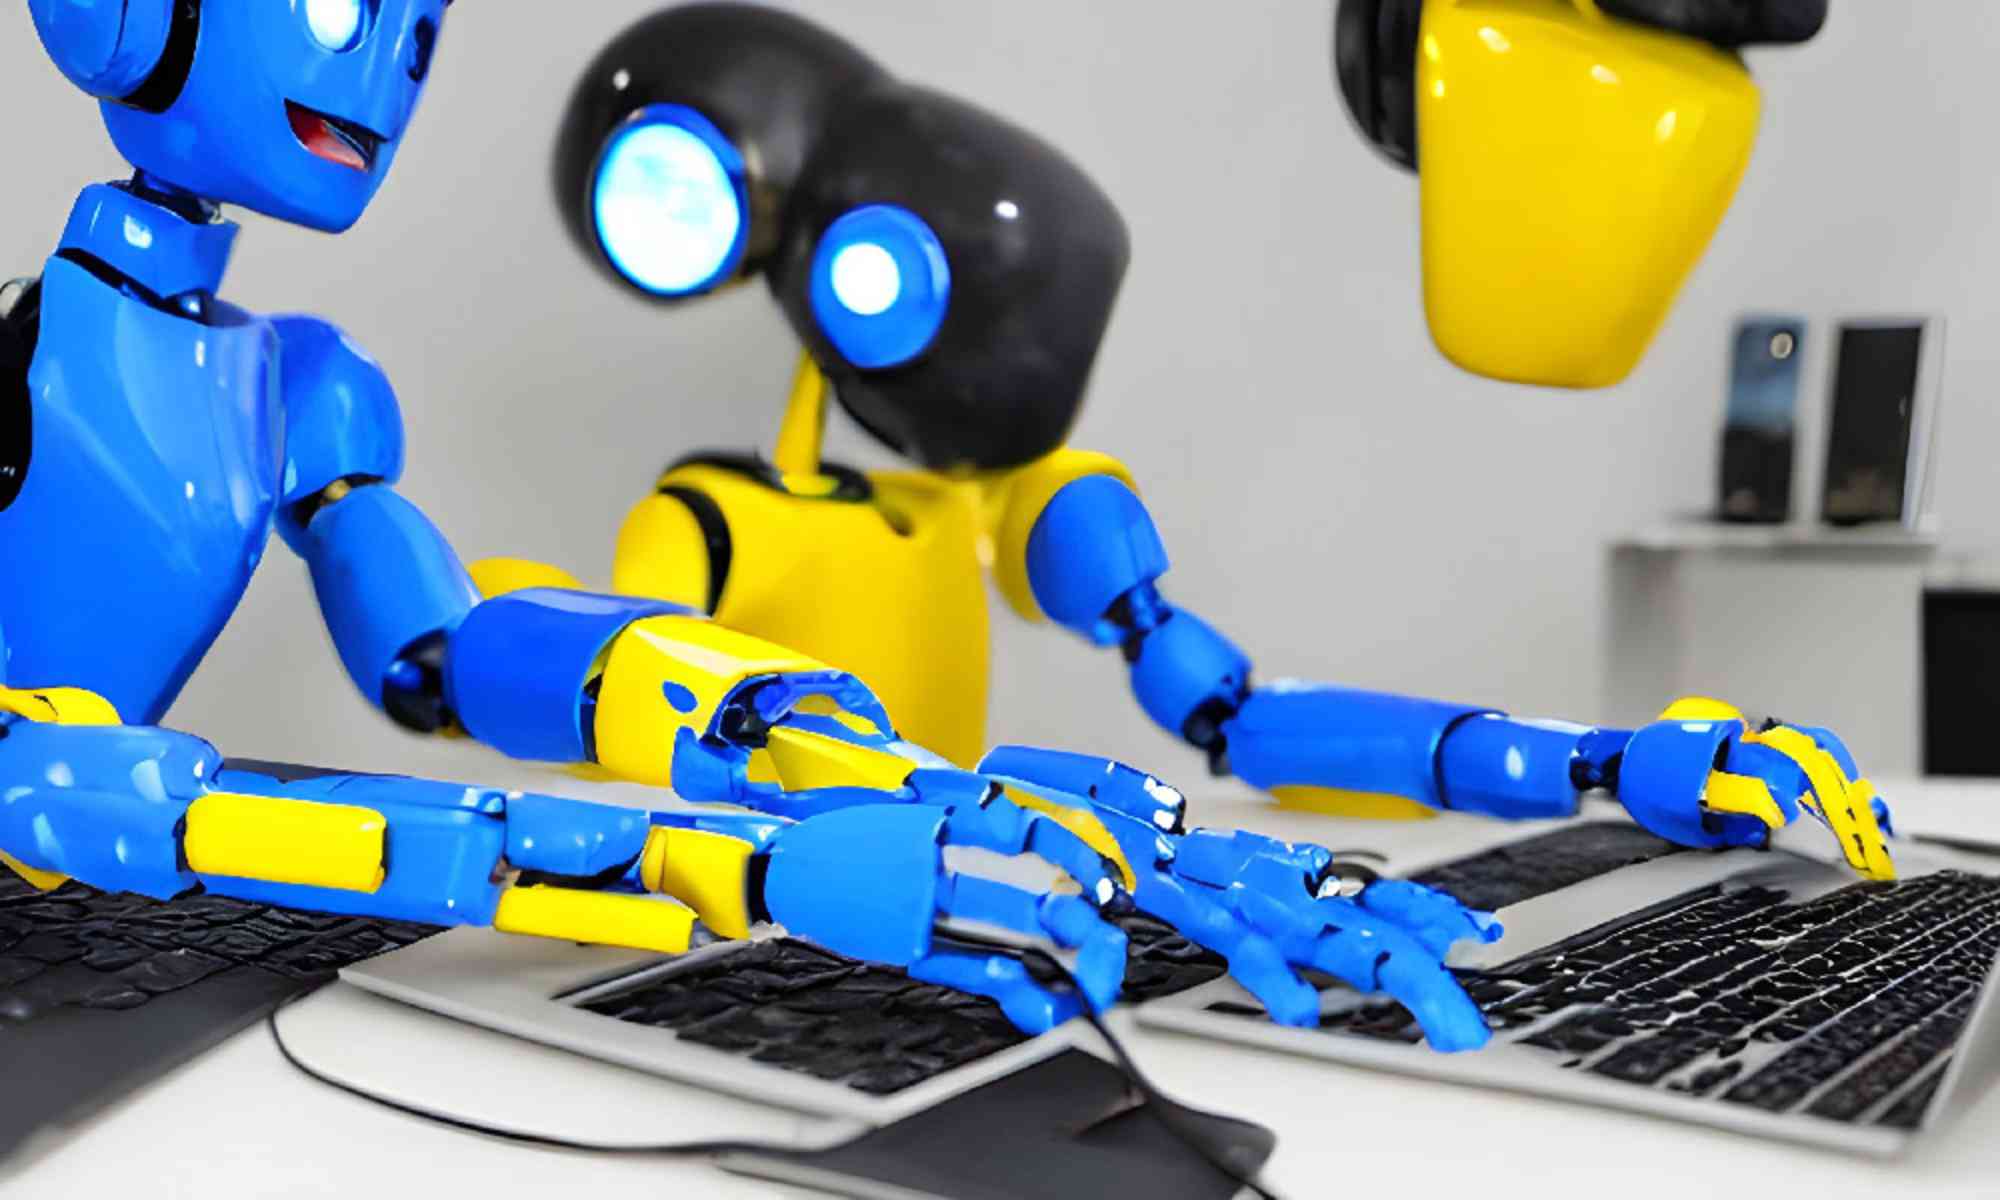 Two blue- and yellow-colored robots work at a laptop to illustrate the concept of ai chatbots like chatgpt affecting higher education.